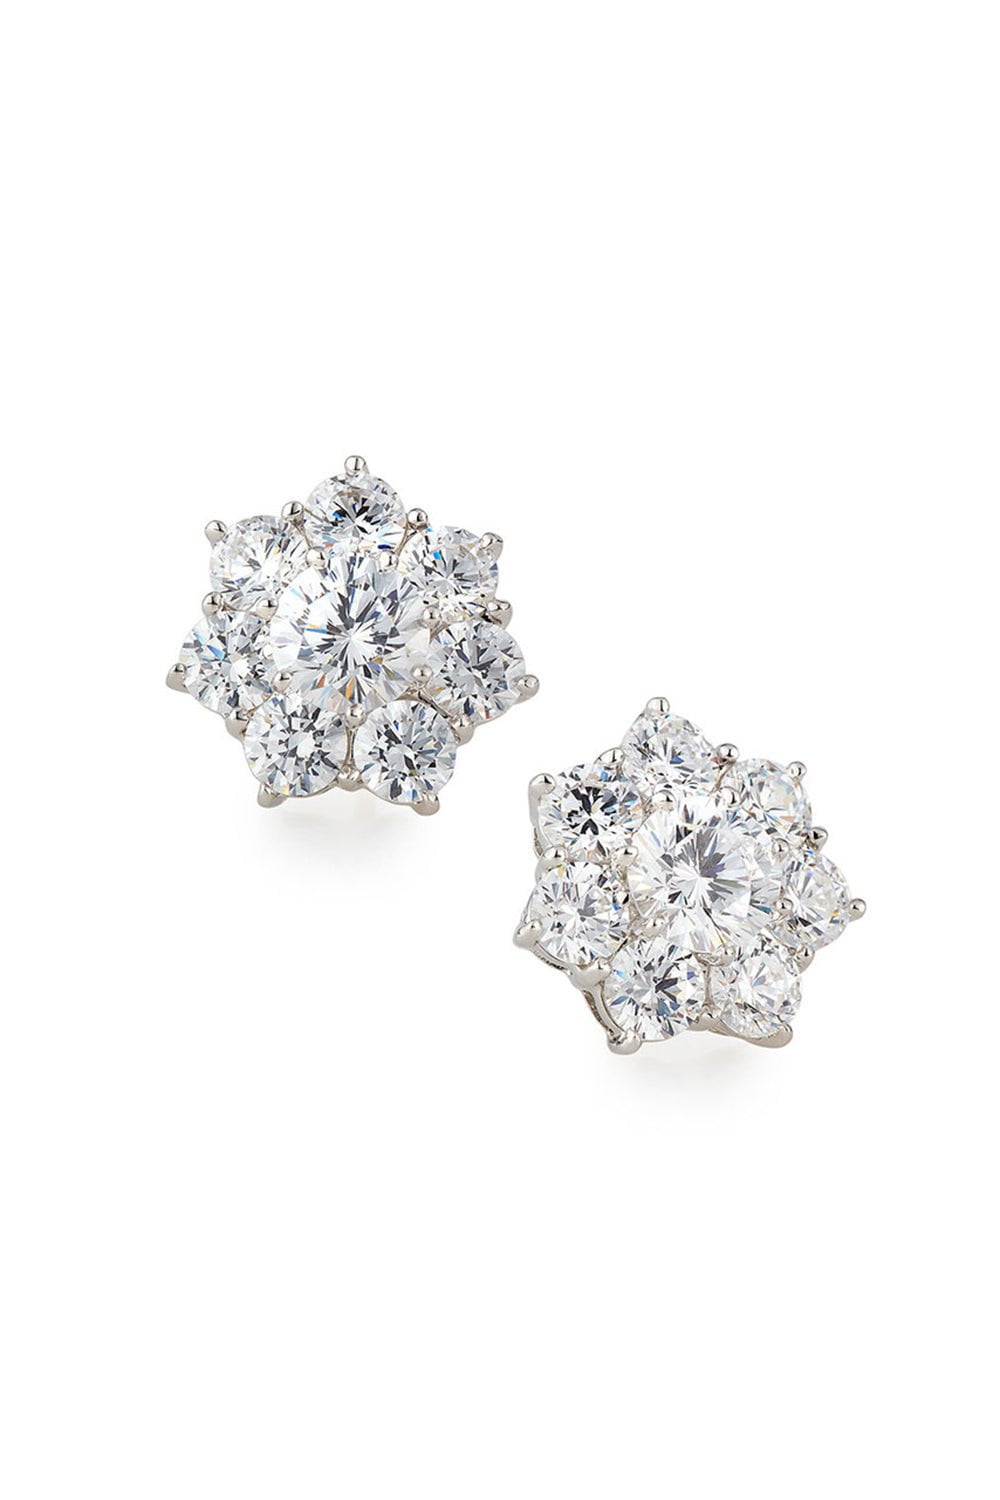 Sparkling Flower Stud Earrings JEWELRYBOUTIQUEEARRING FANTASIA by DESERIO   